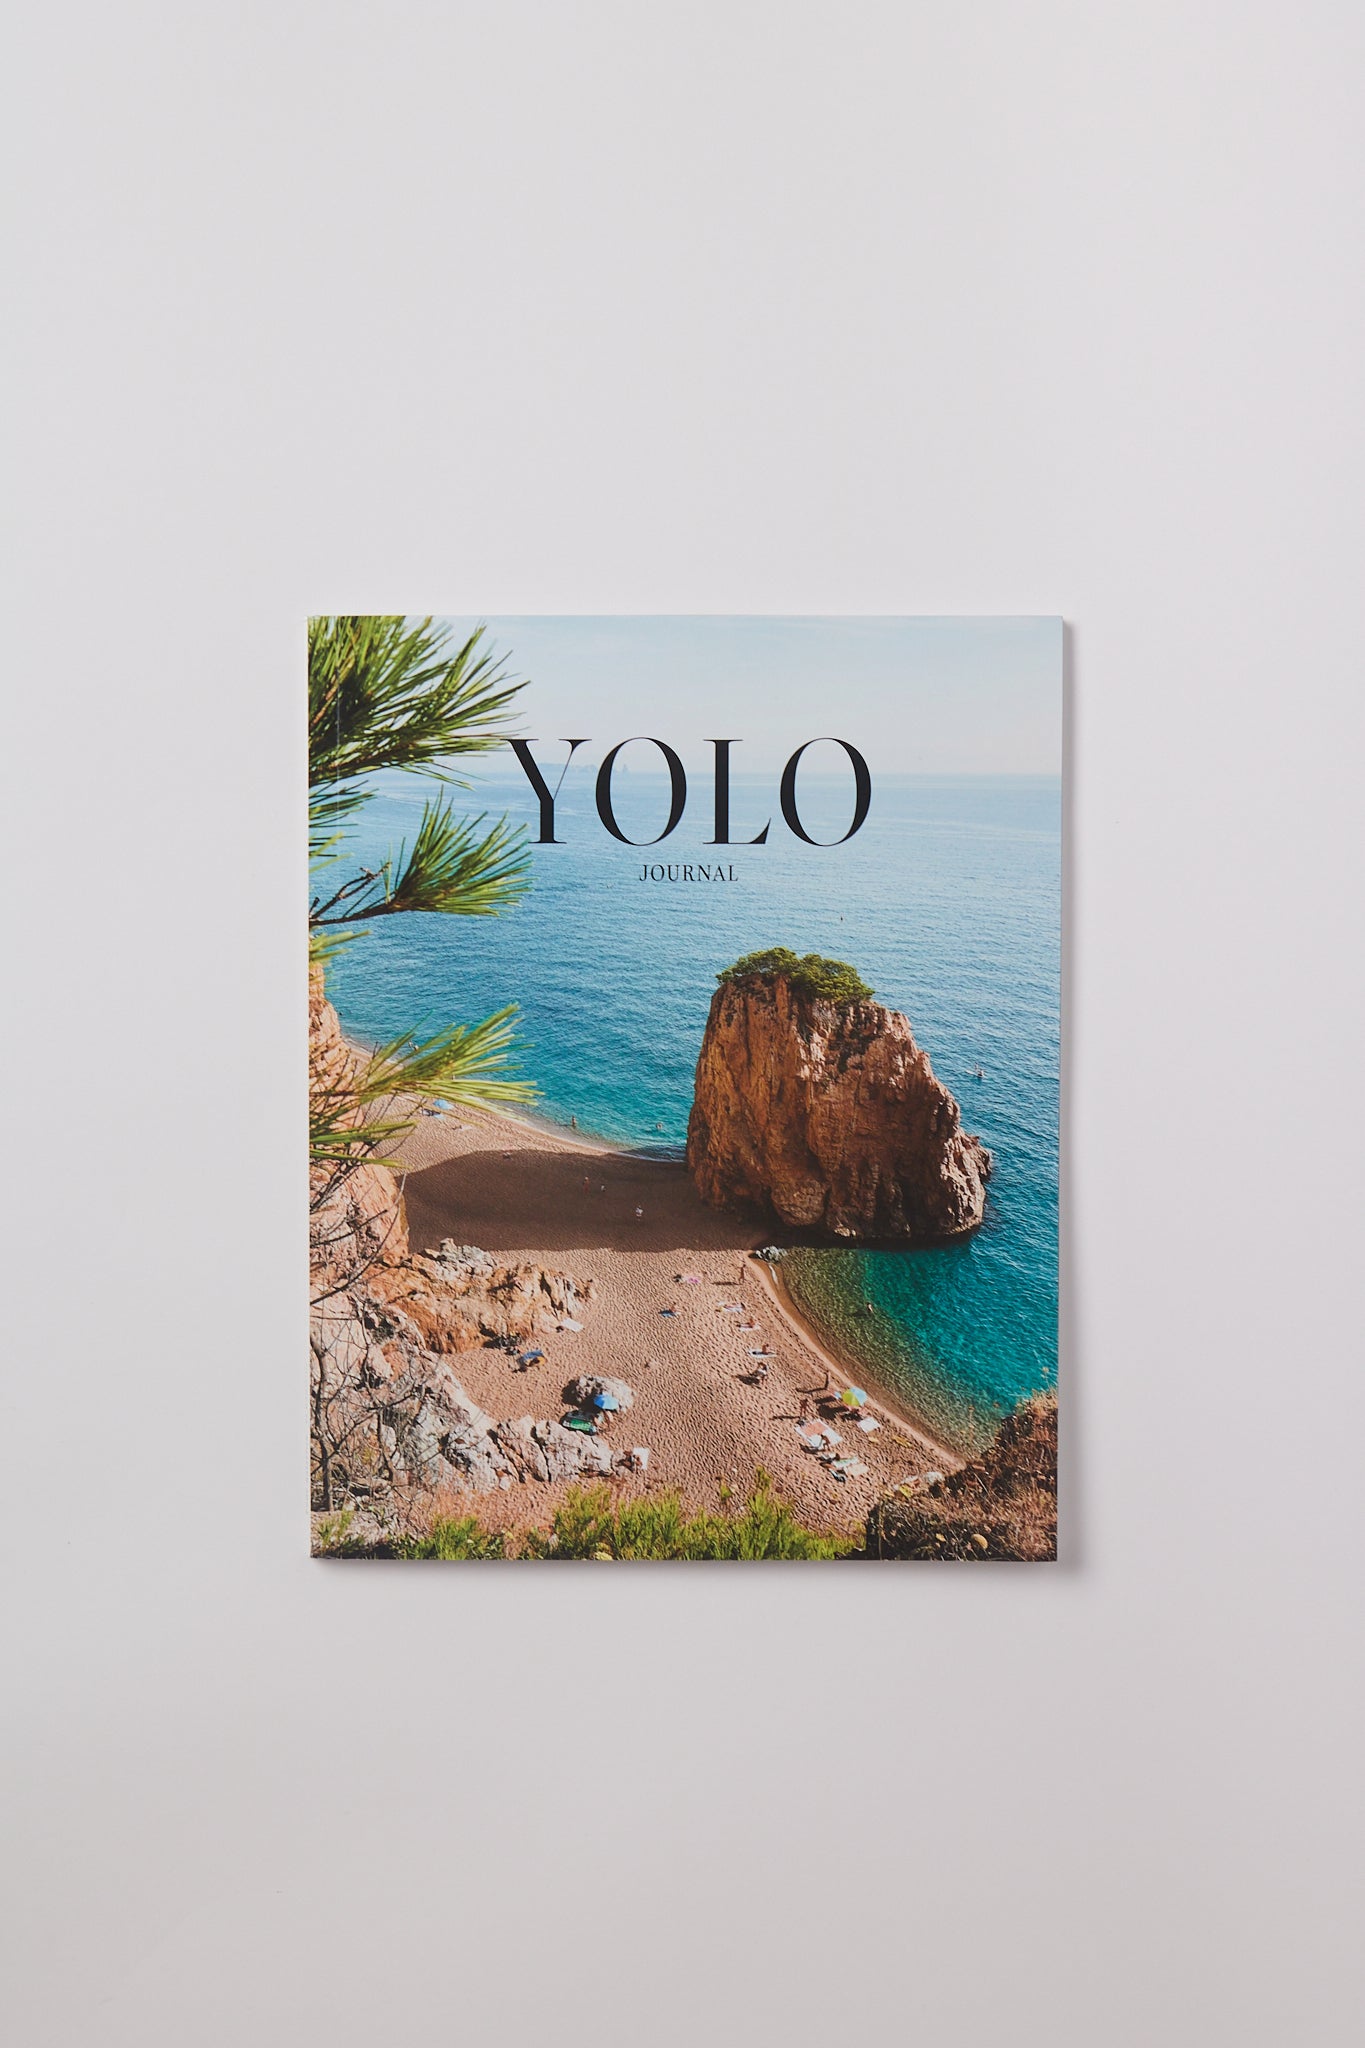 Yolo Journal Issue 16